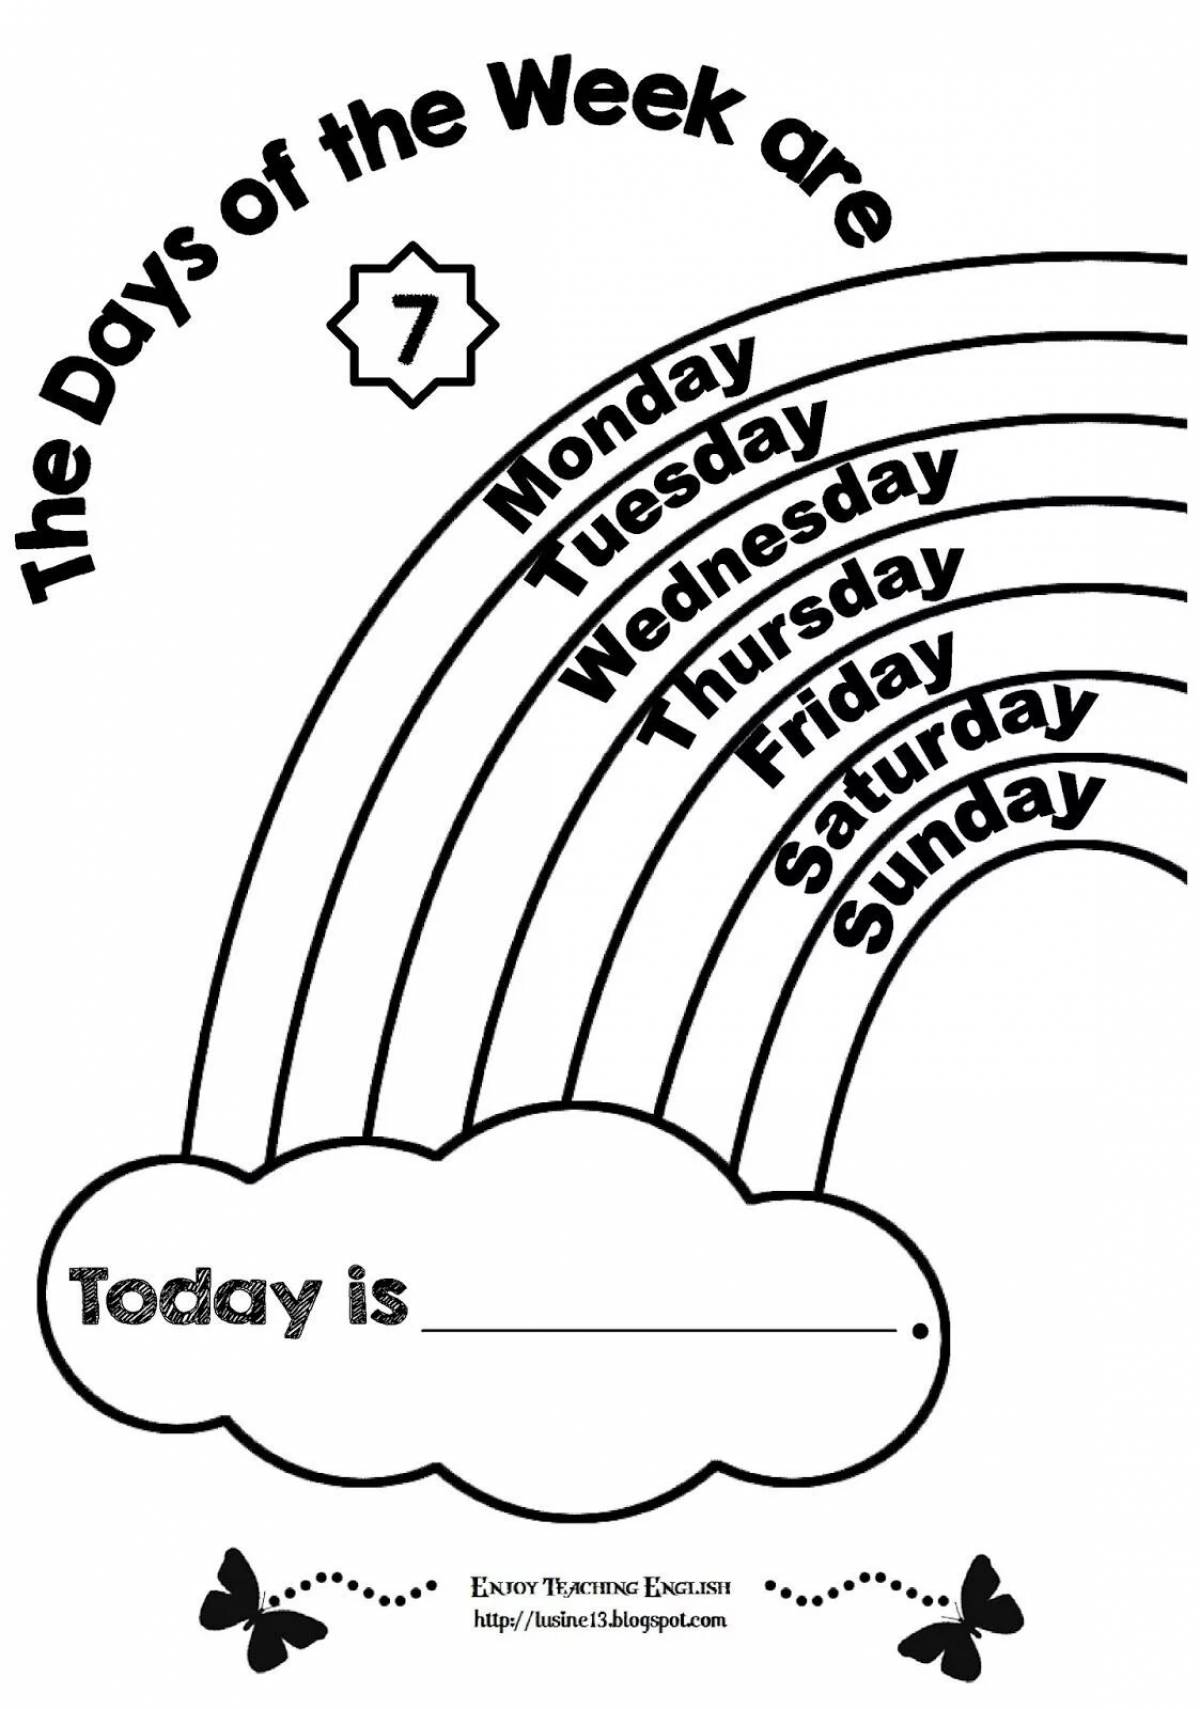 Days of the week in English #3